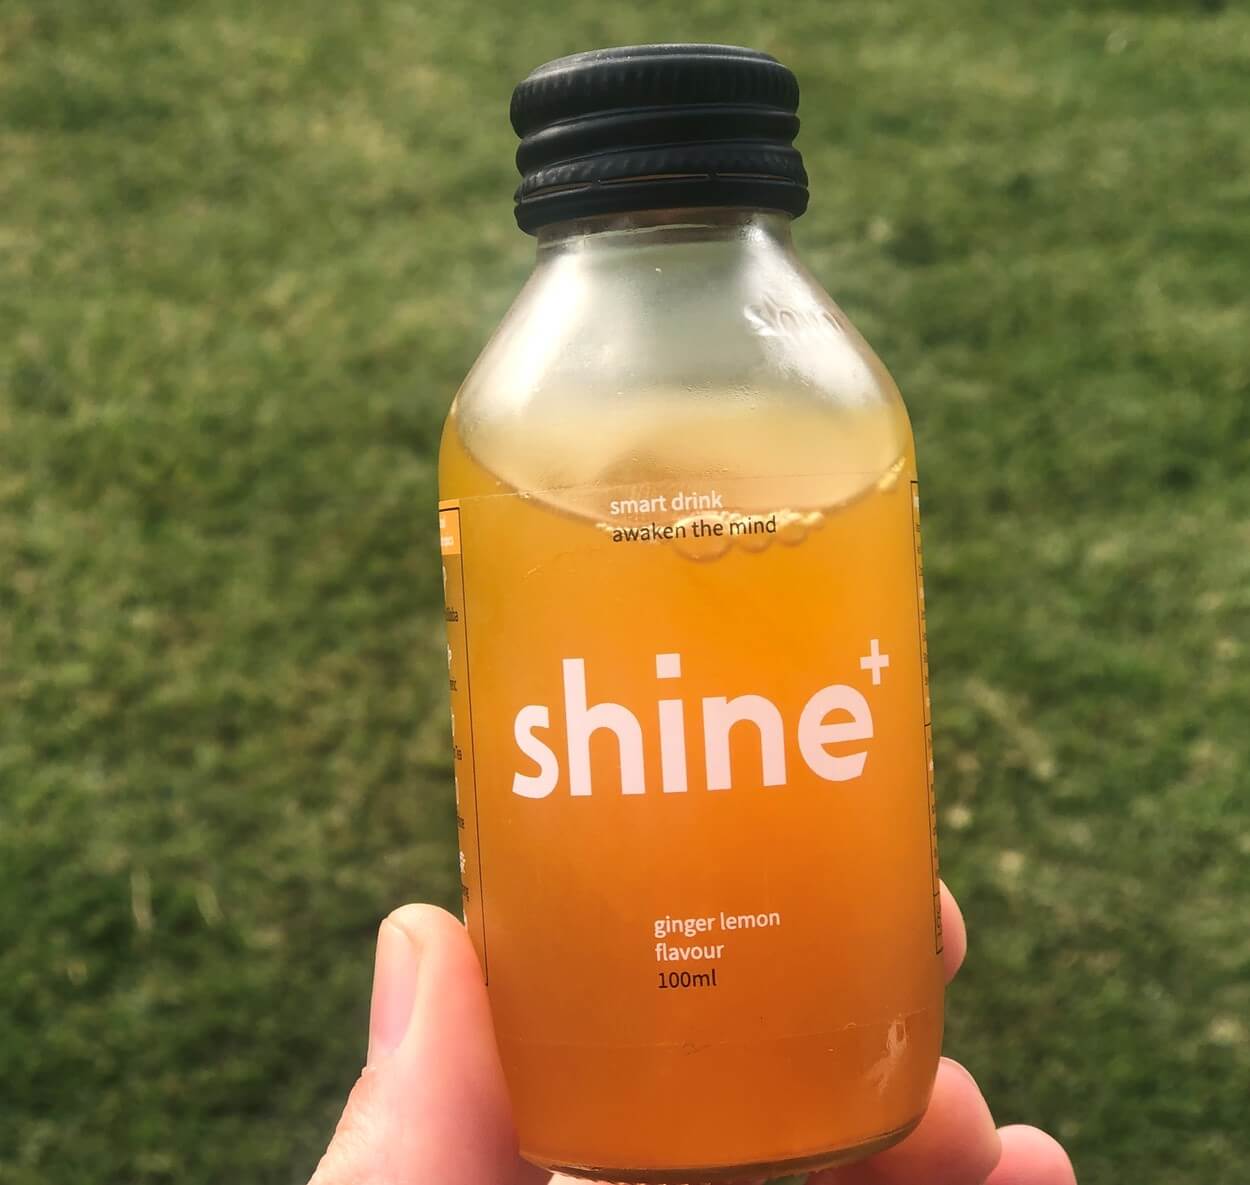 Shine Energy Drink Review (Full Analysis)